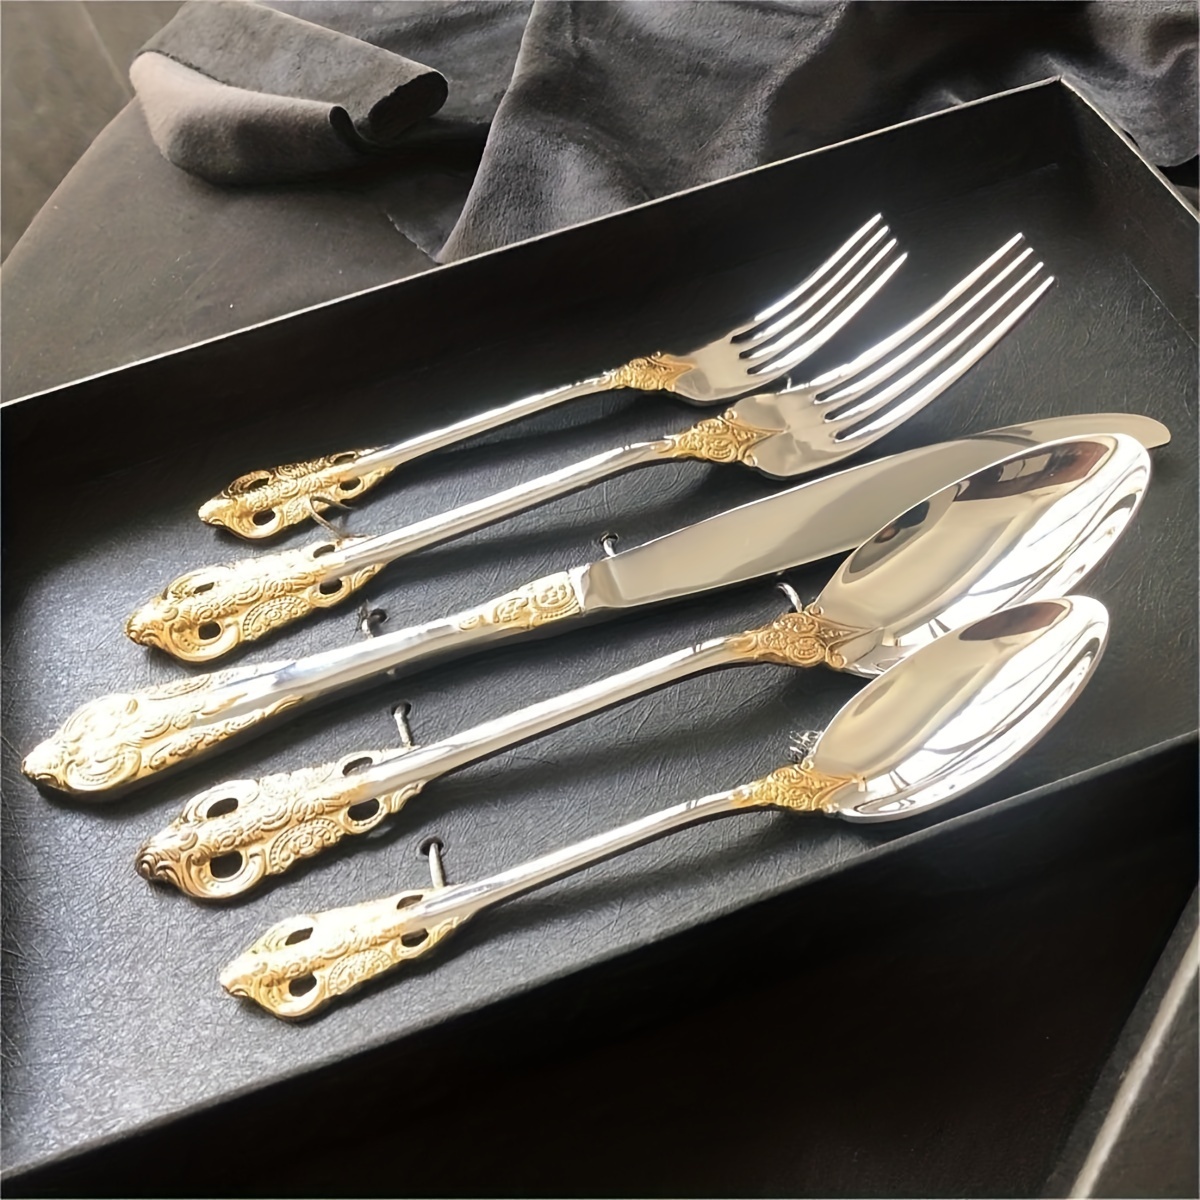 Unique Silverware Set Flatware Exotique Collection Stainless Steel Cutlery  Mirror Polished Kitchen Utensils Tableware Service with Dinner Fork Knife